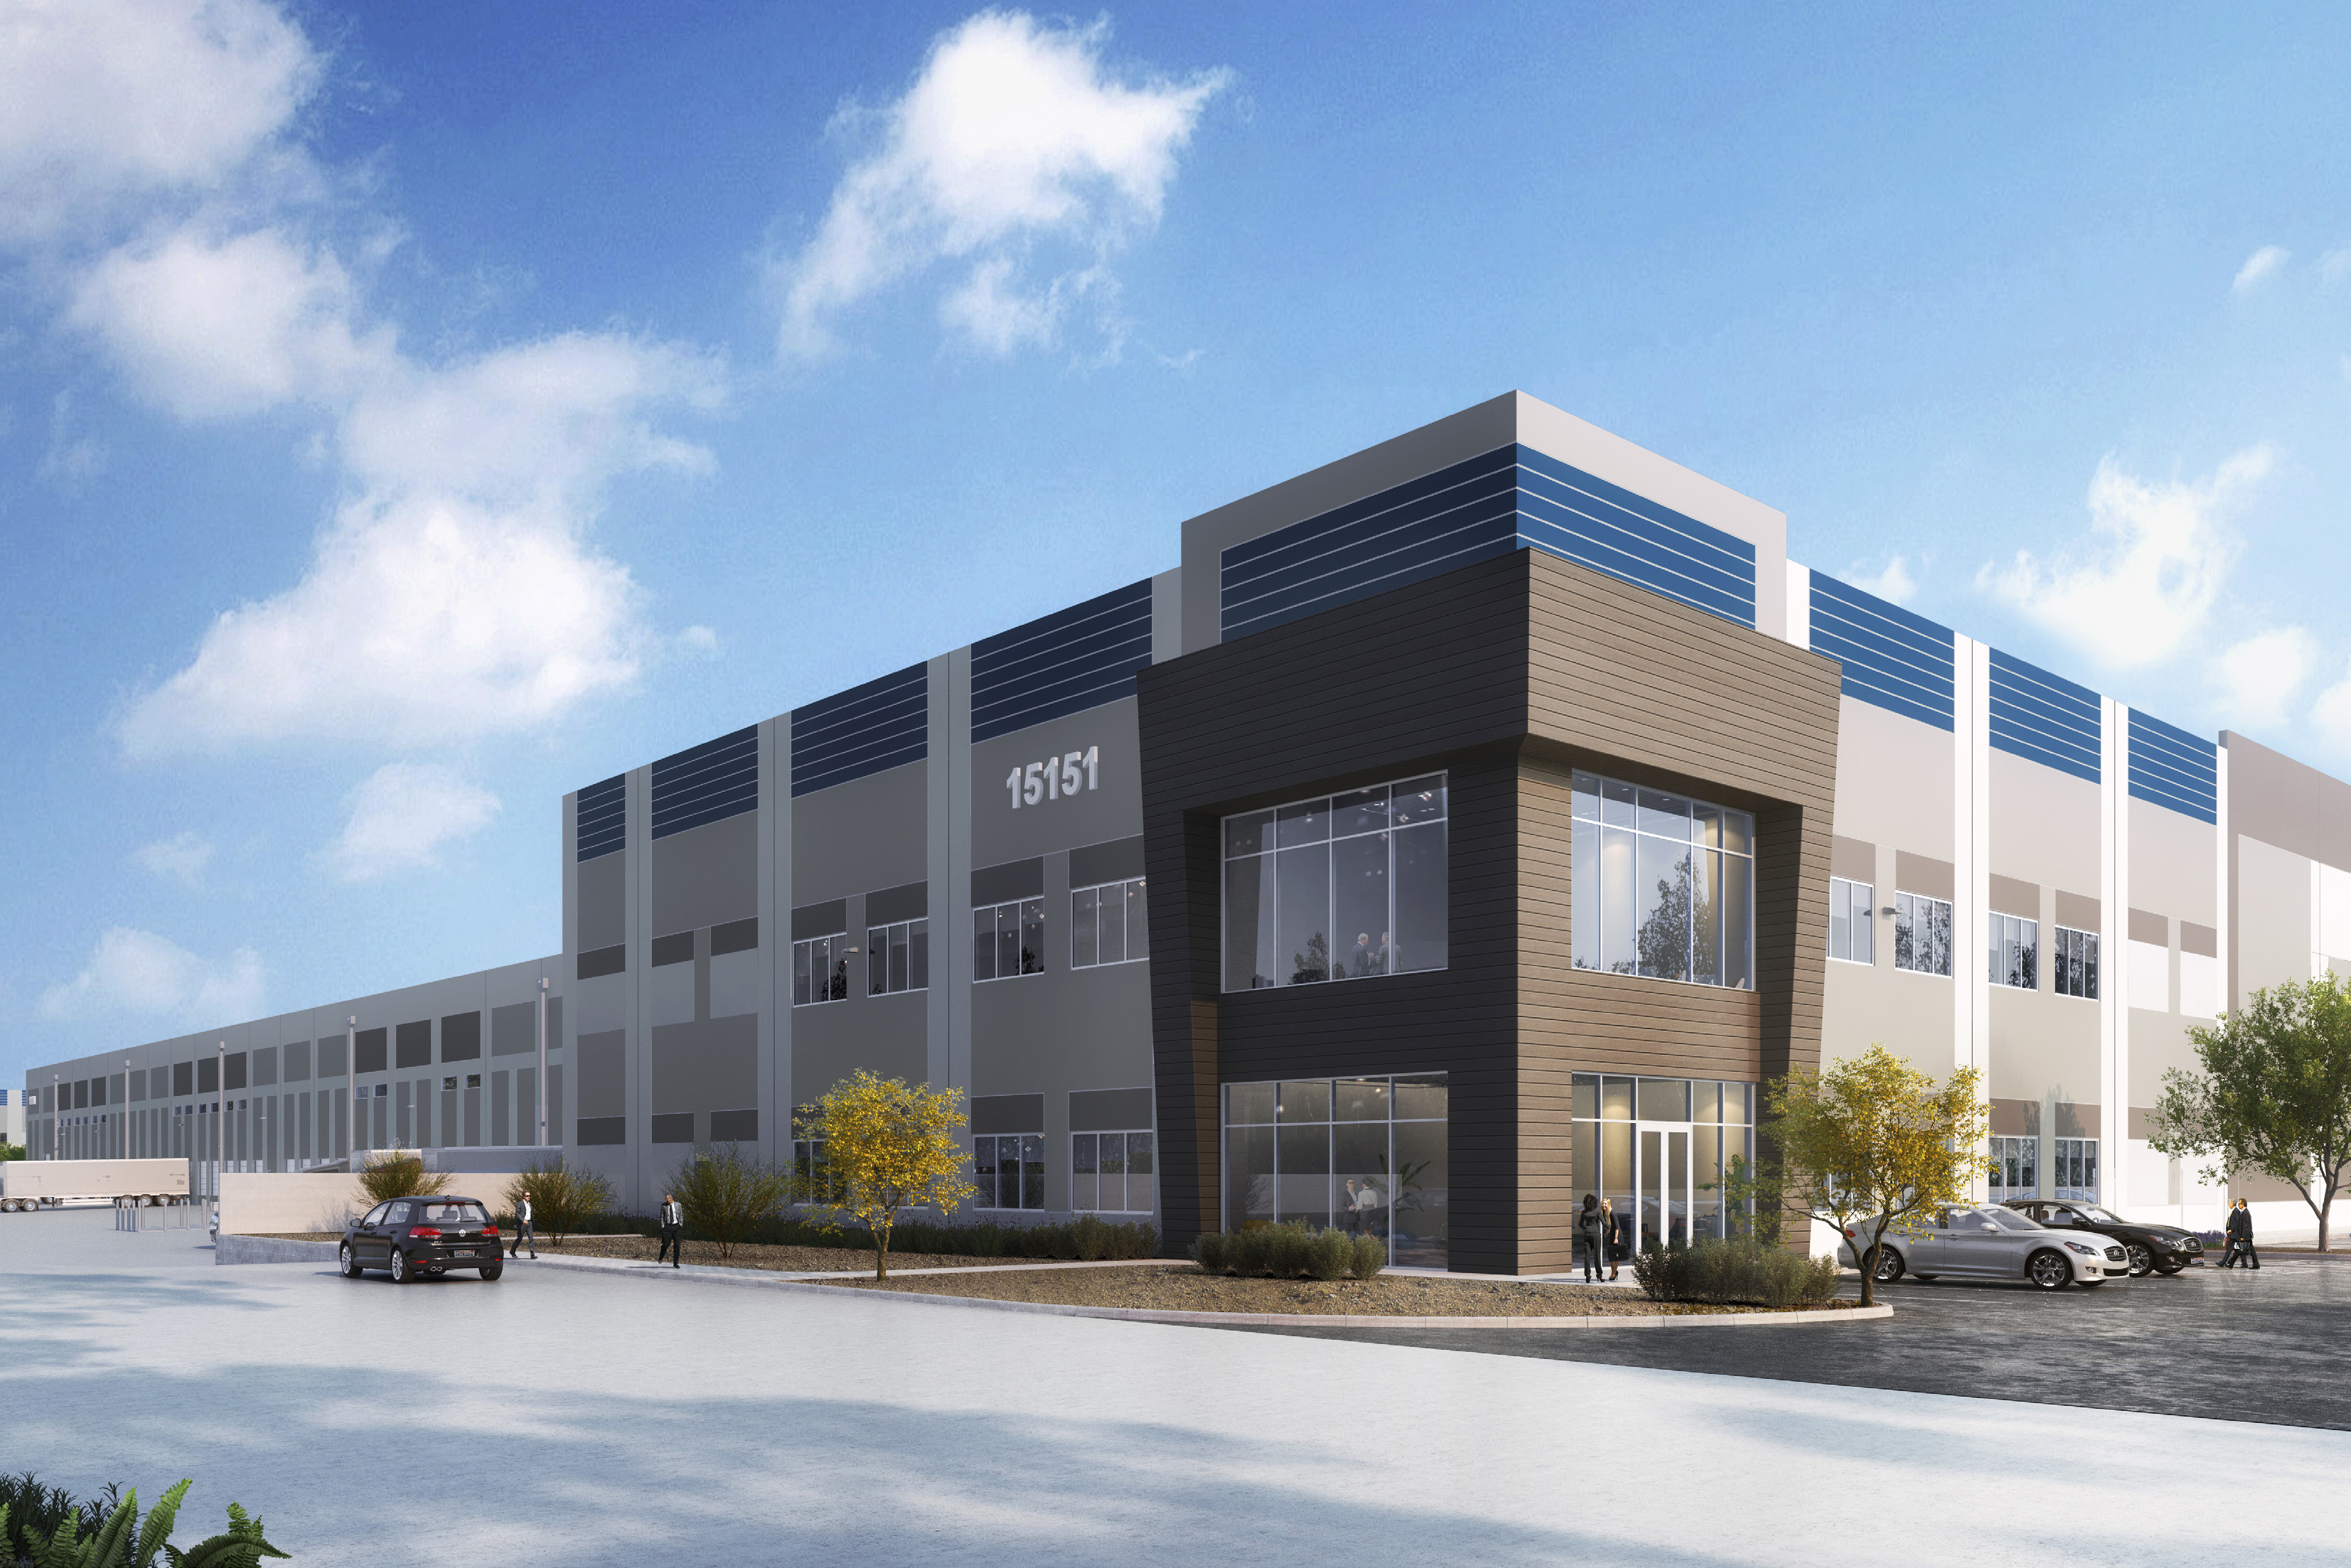 RanchHarbor, Manhattan West Acquire 91,000 SF Industrial Infill